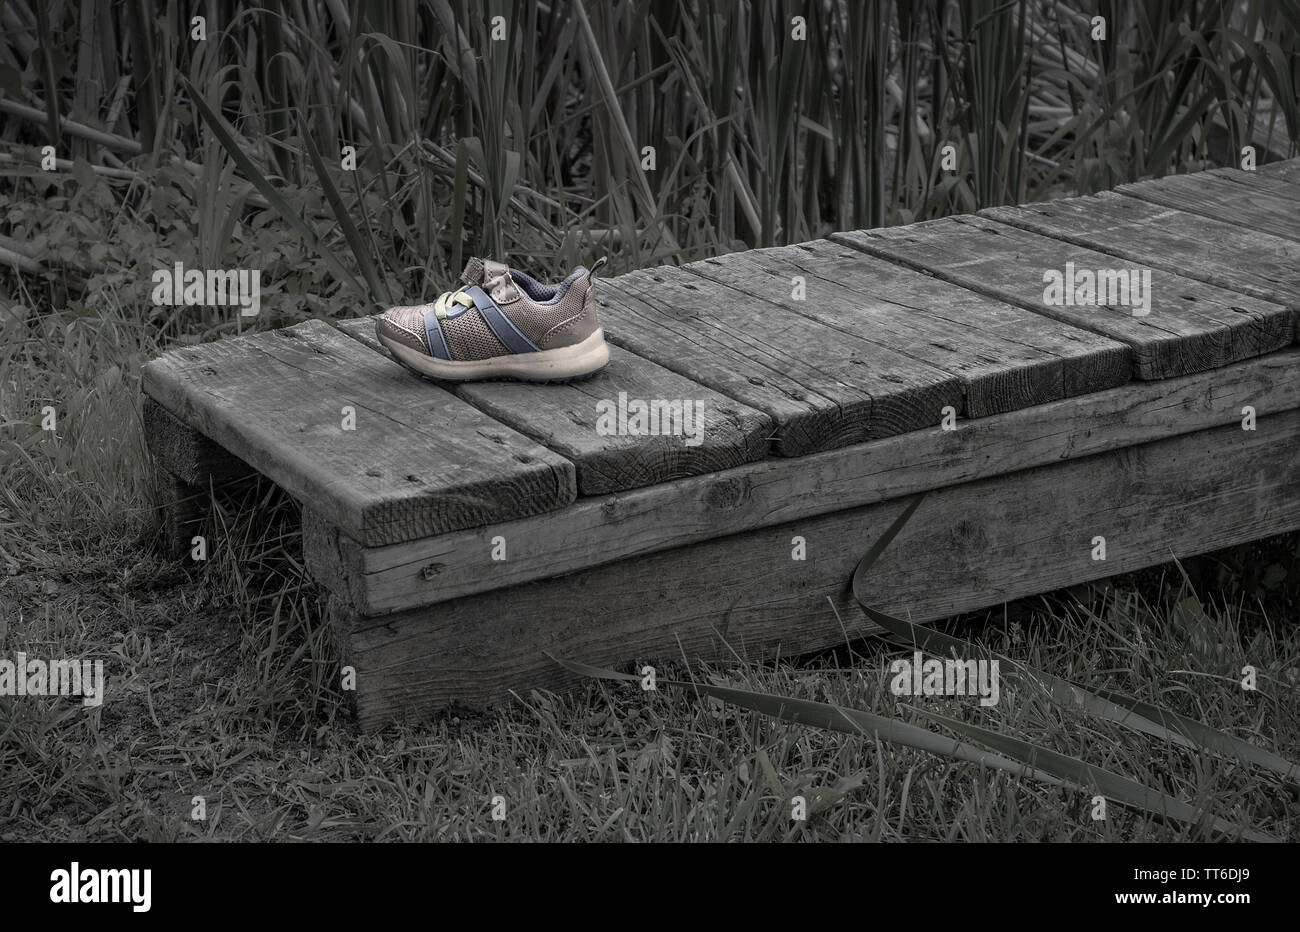 On a small dock, the shoe of a child..all alone ..Monochrome Stock Photo